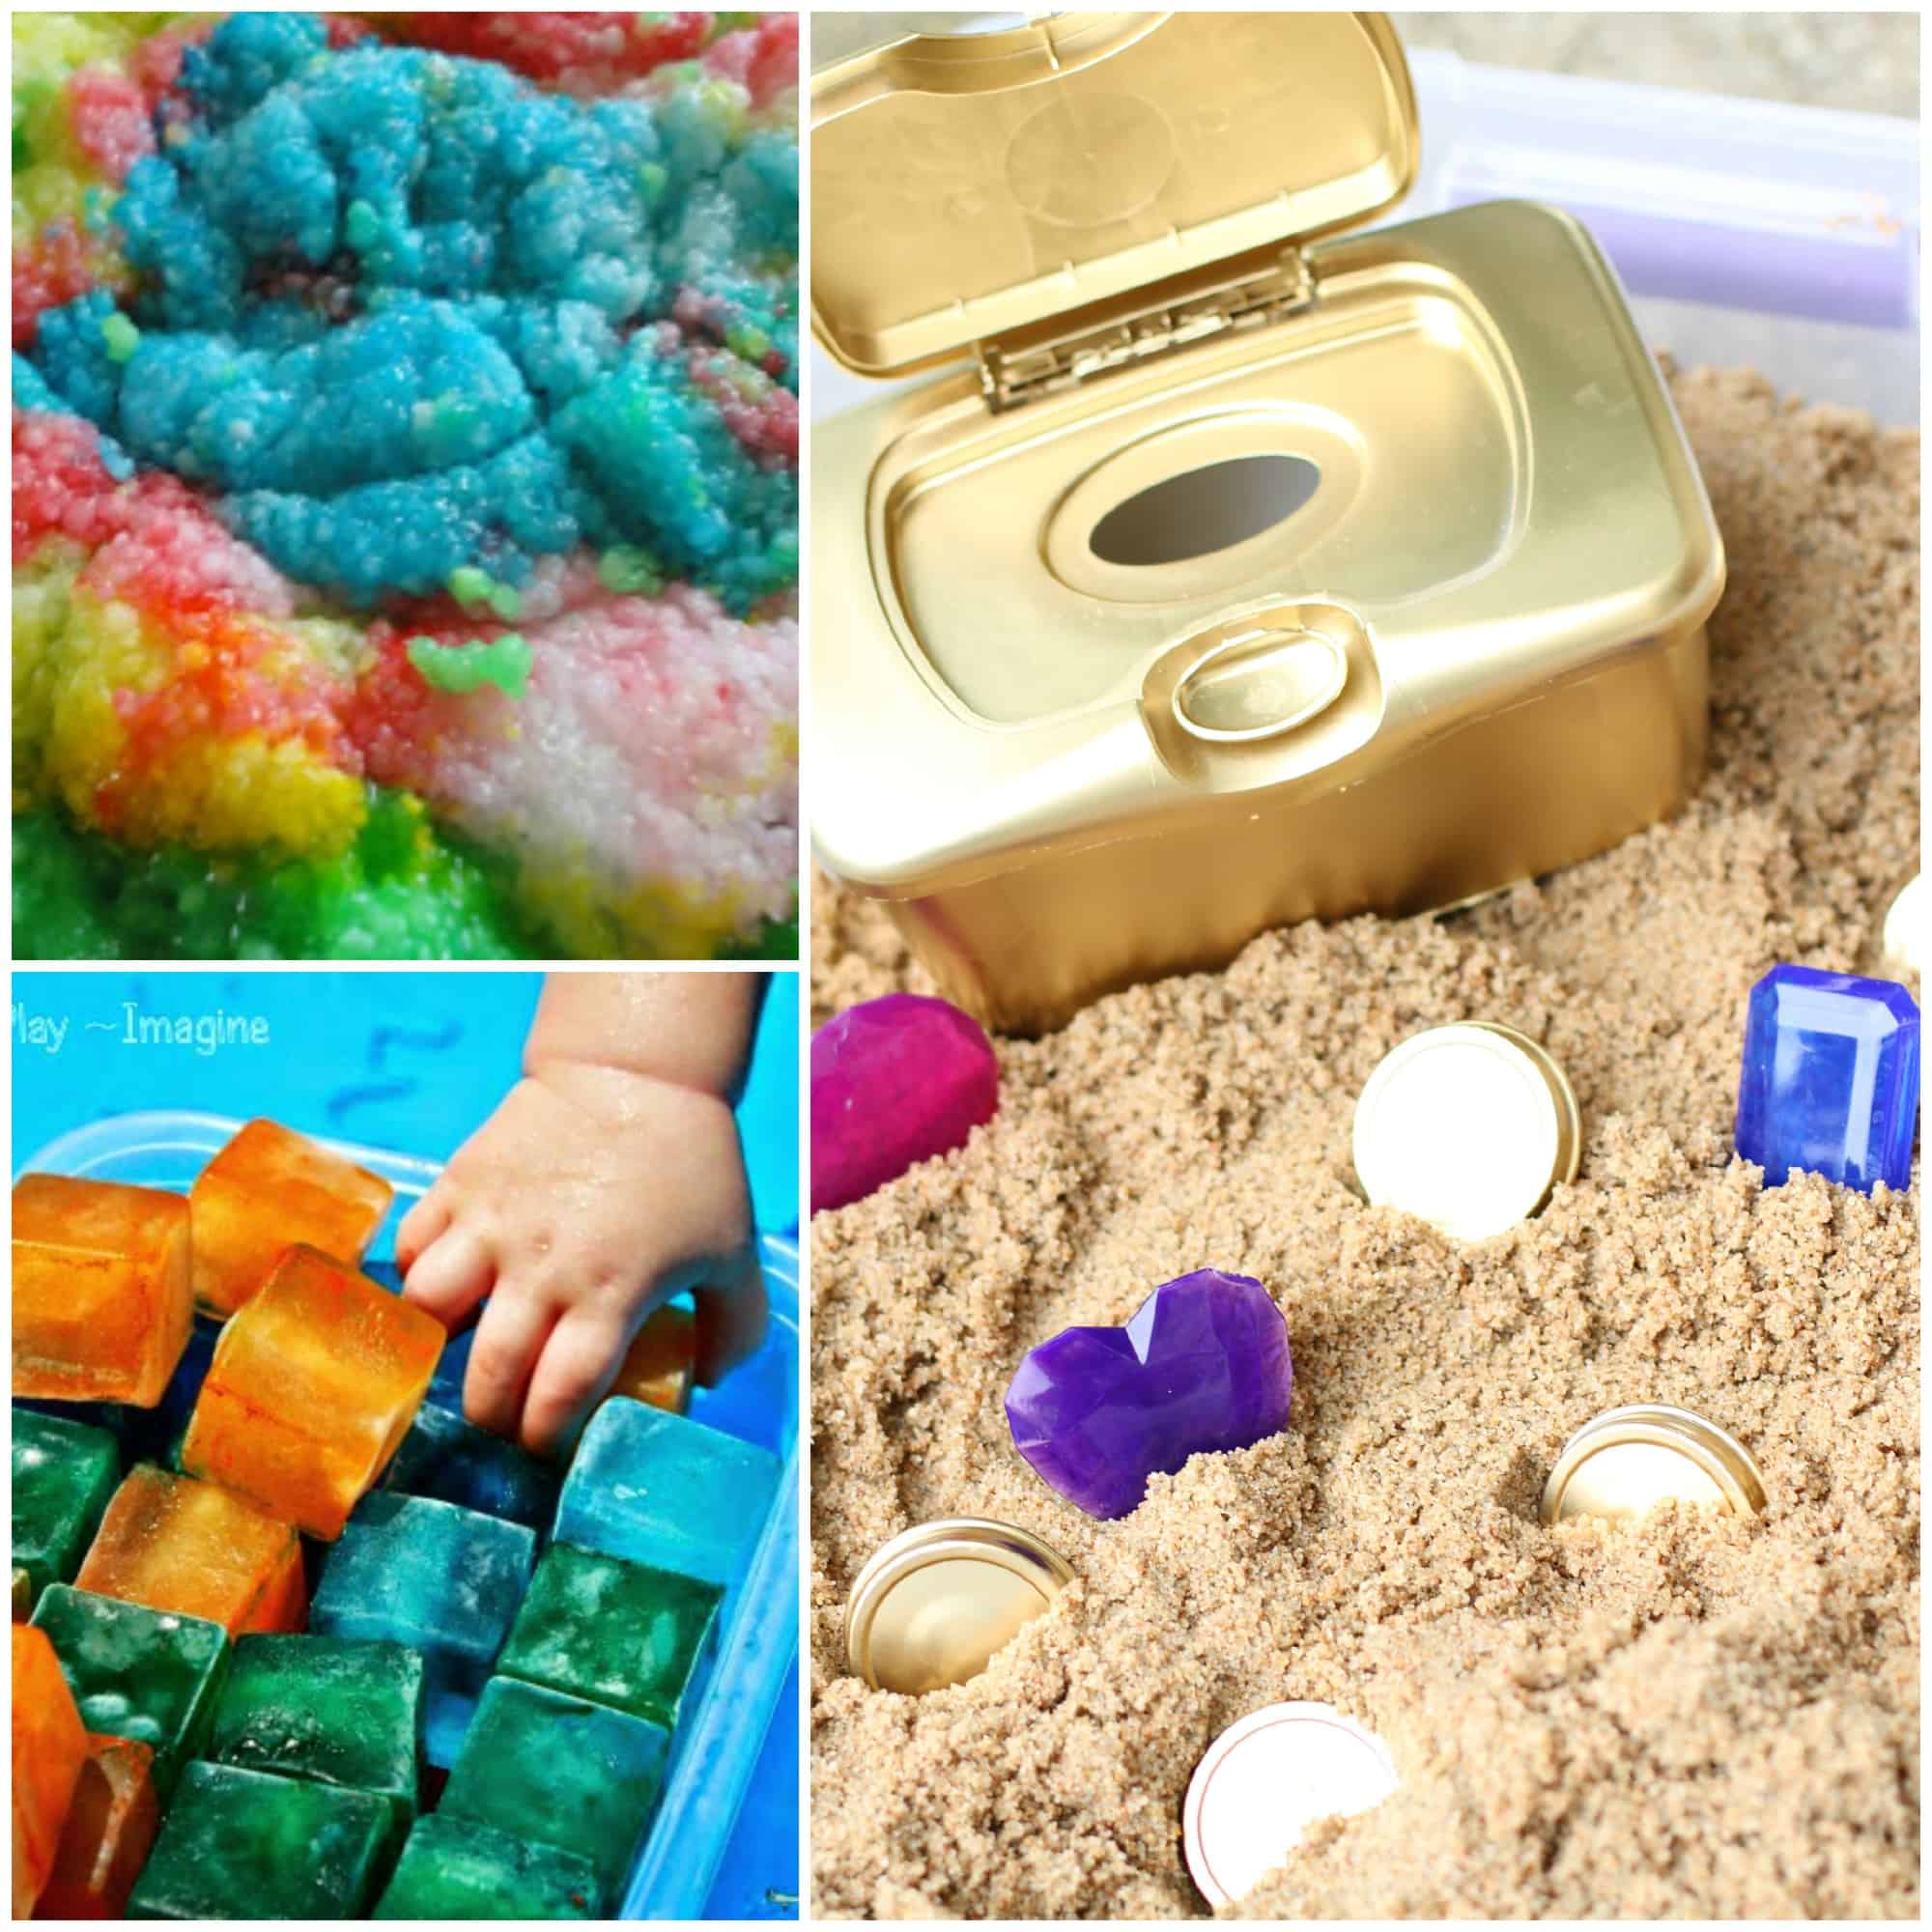 18 Sensory Tubs For Toddlers I Can Teach My Child